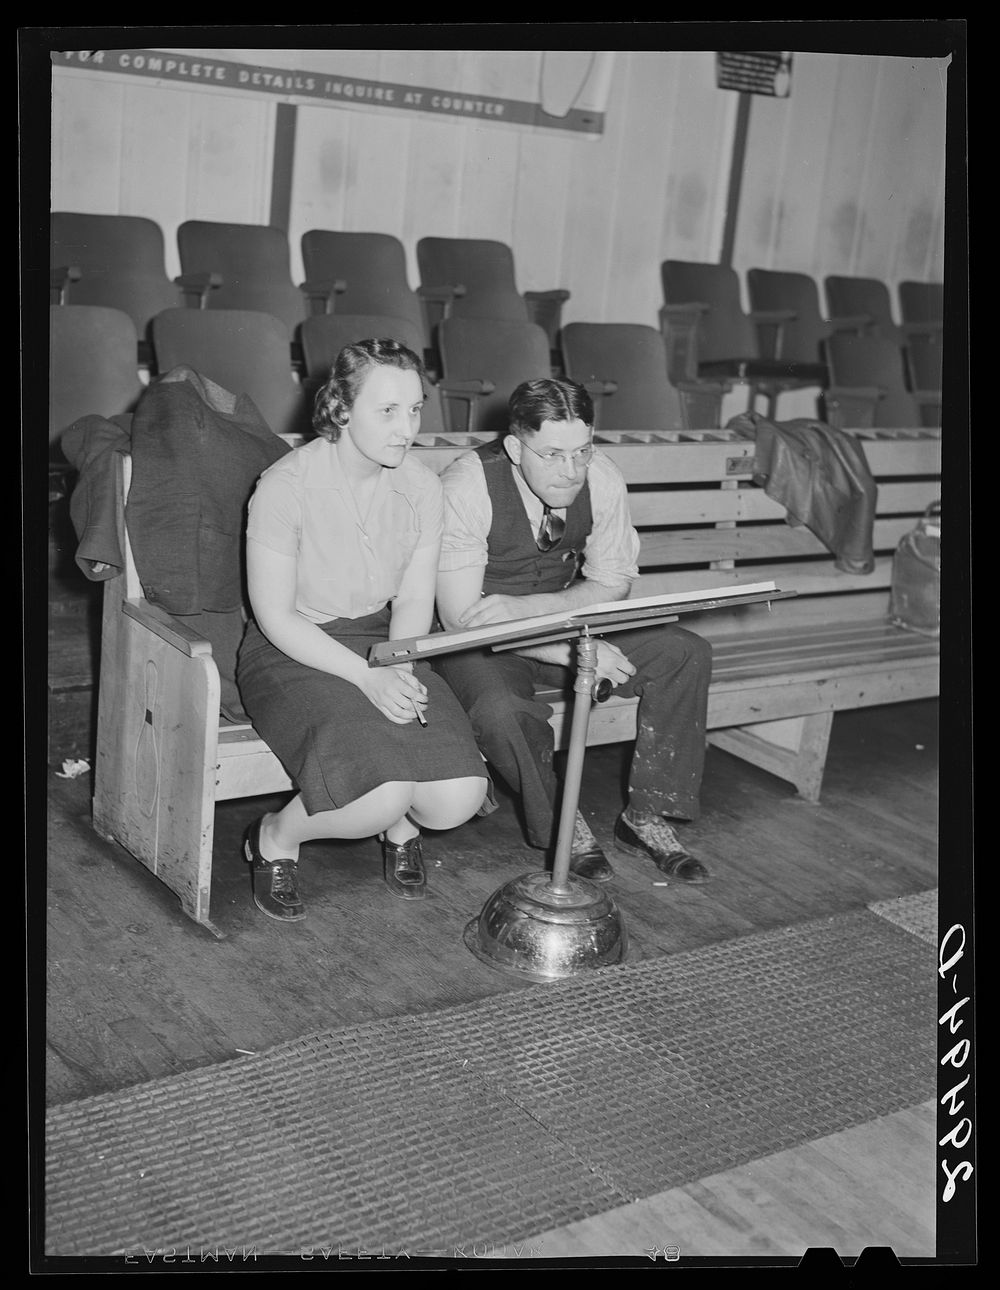 [Untitled photo, possibly related to: Keeping score. Bowling alley, Clinton, Indiana]. Sourced from the Library of Congress.